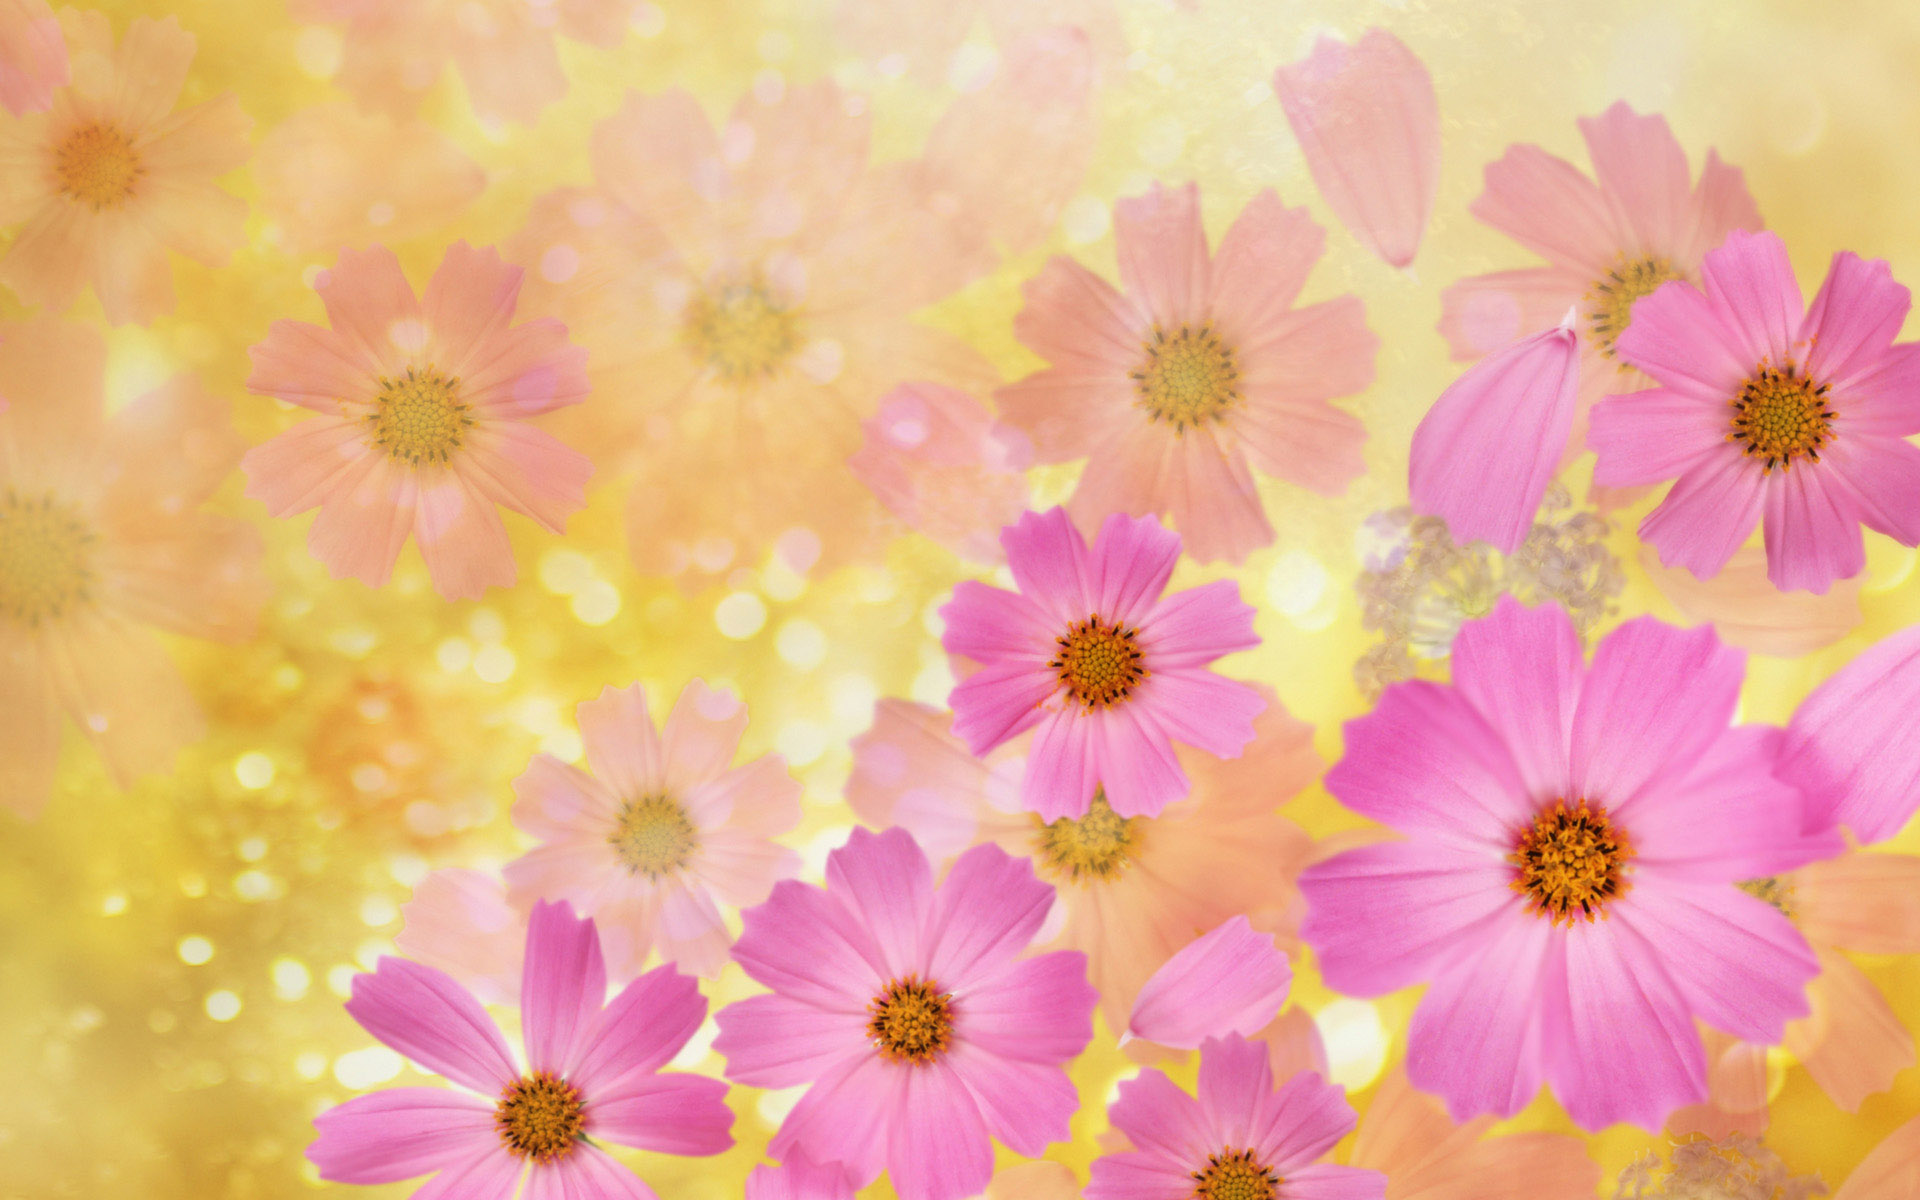 Flowers Wallpaper In High Resolution For Get Cosmos